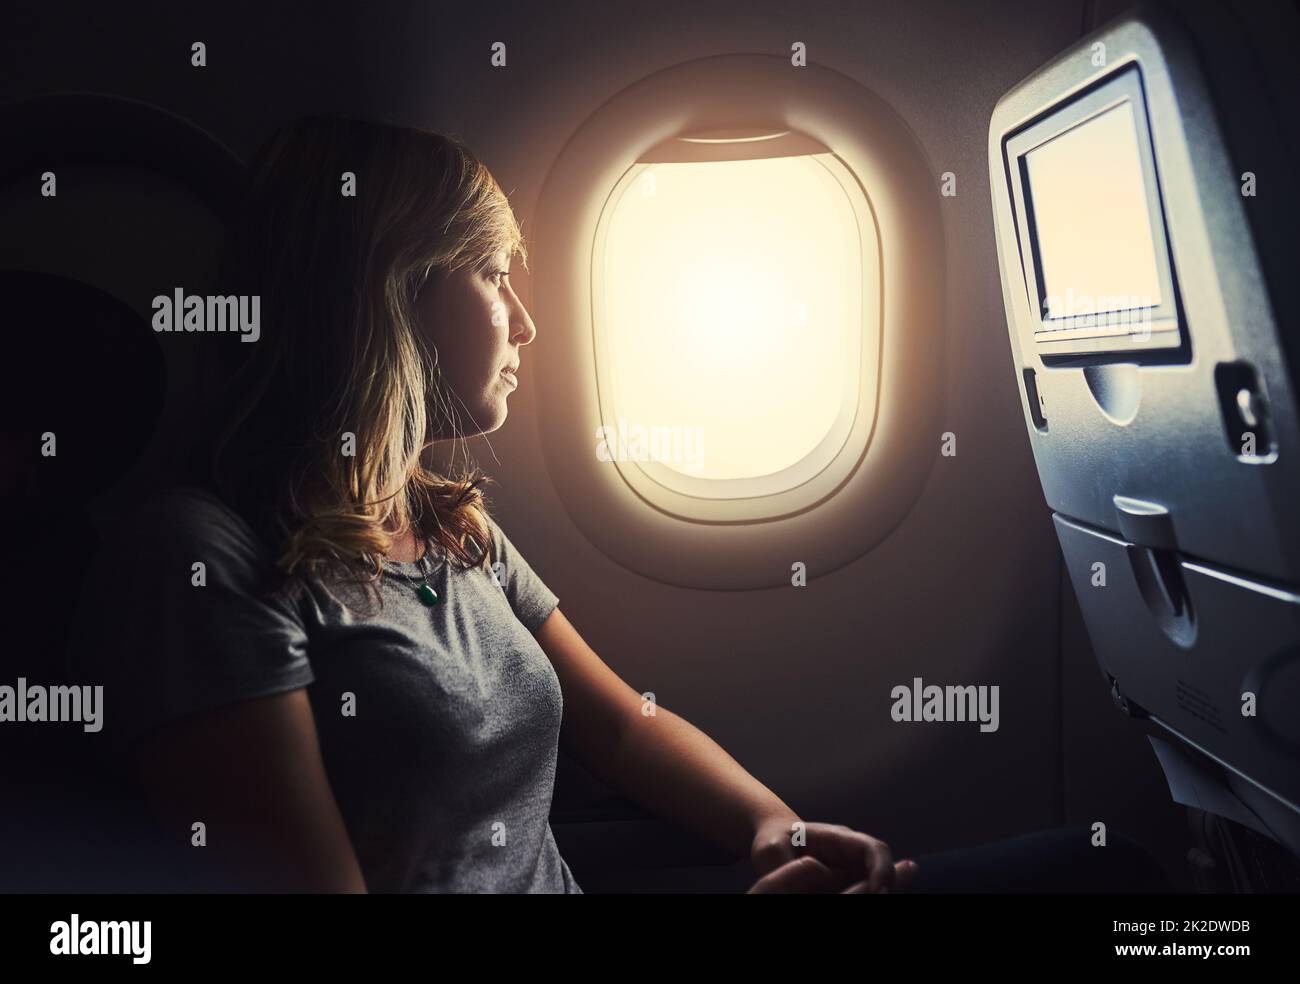 What a view. Shot of a young person in an airplane. Stock Photo